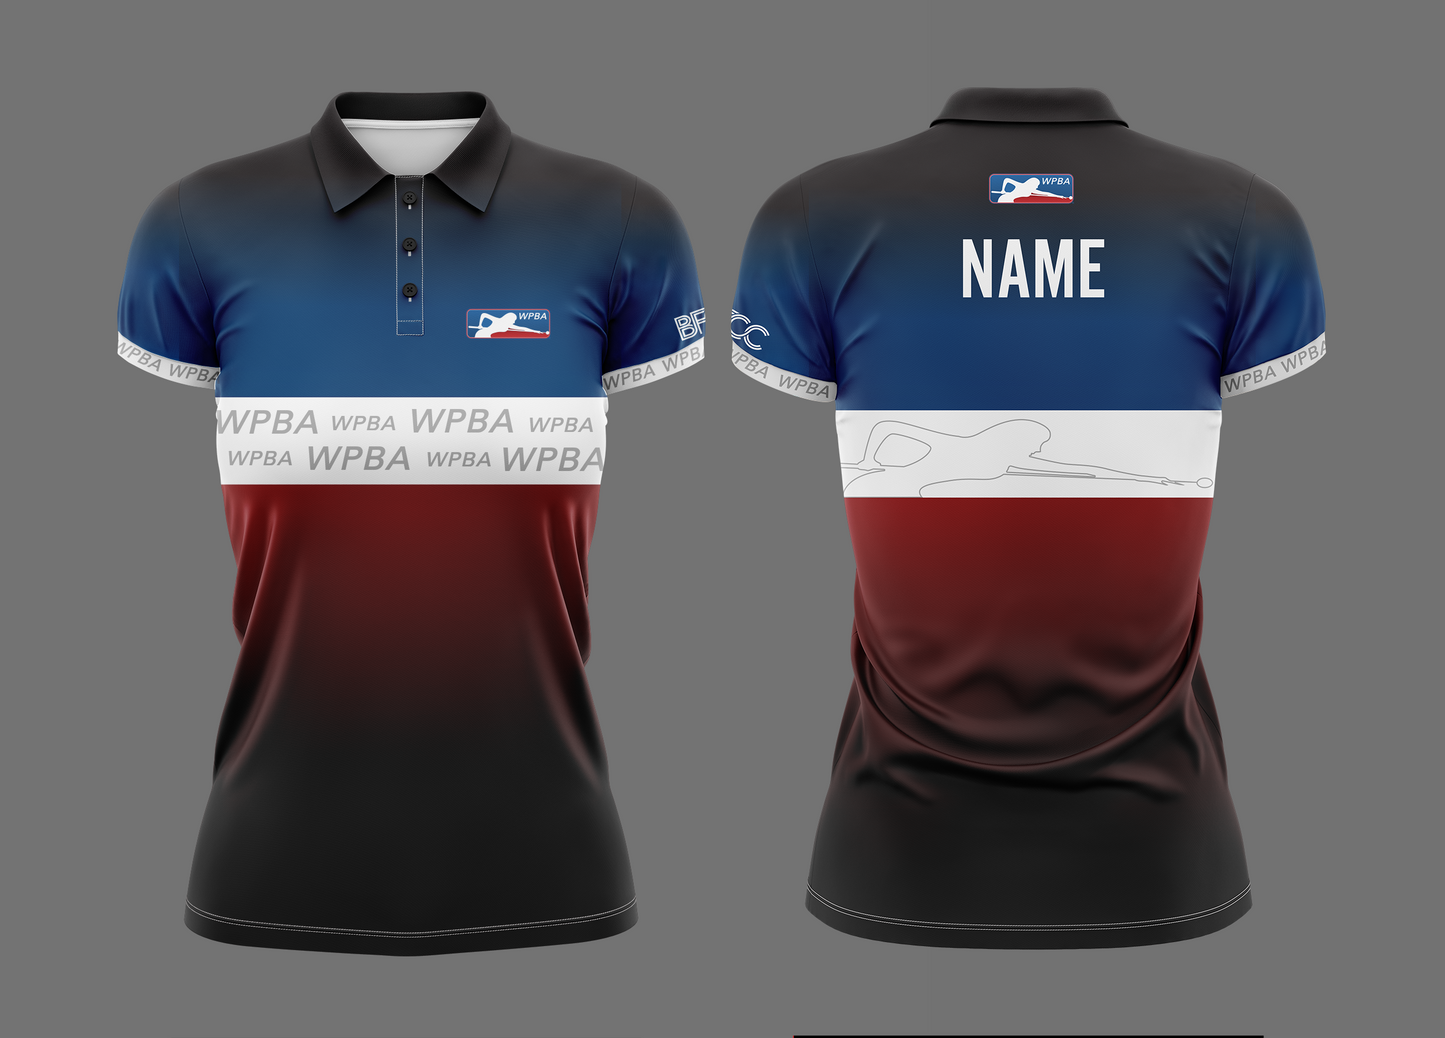 WPBA OFFICIAL JERSEY